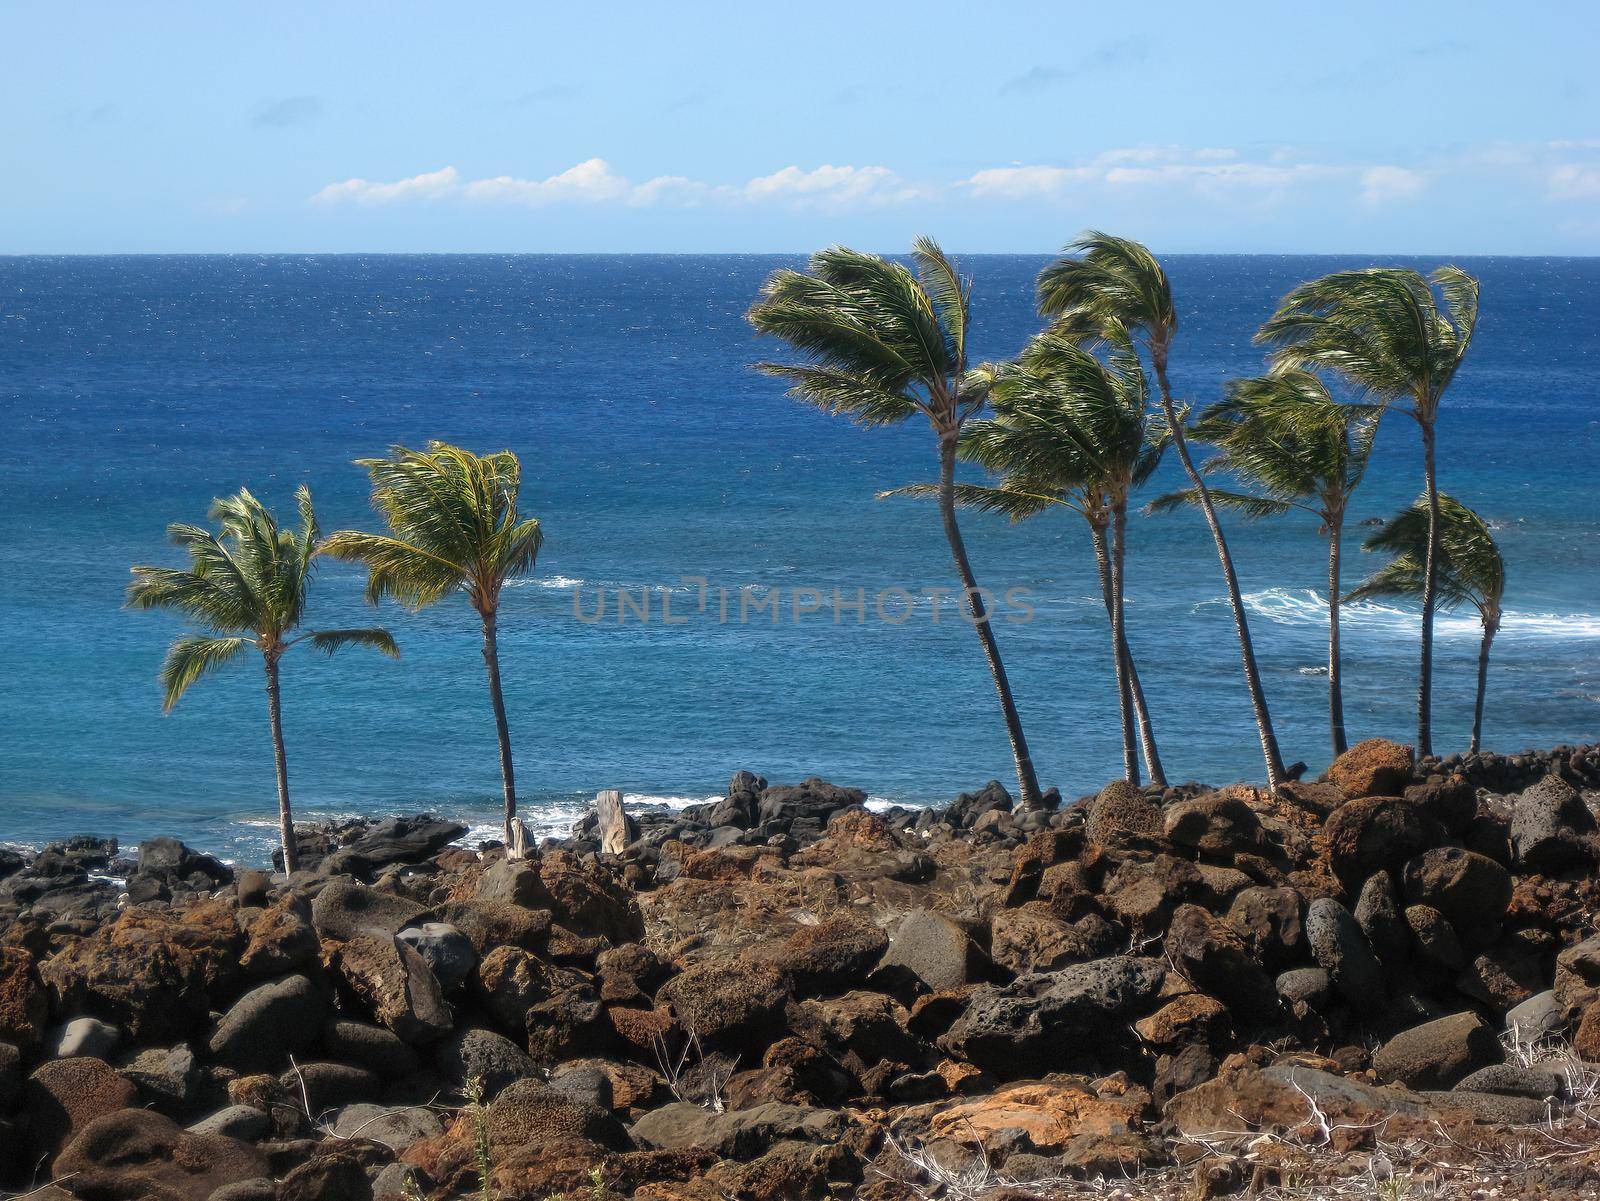 Pam trees blow in the wind along the shores of the Big Island in Hawaii on a windy sunny day. The blue Pacific Ocean sparkles in the background. High quality photo